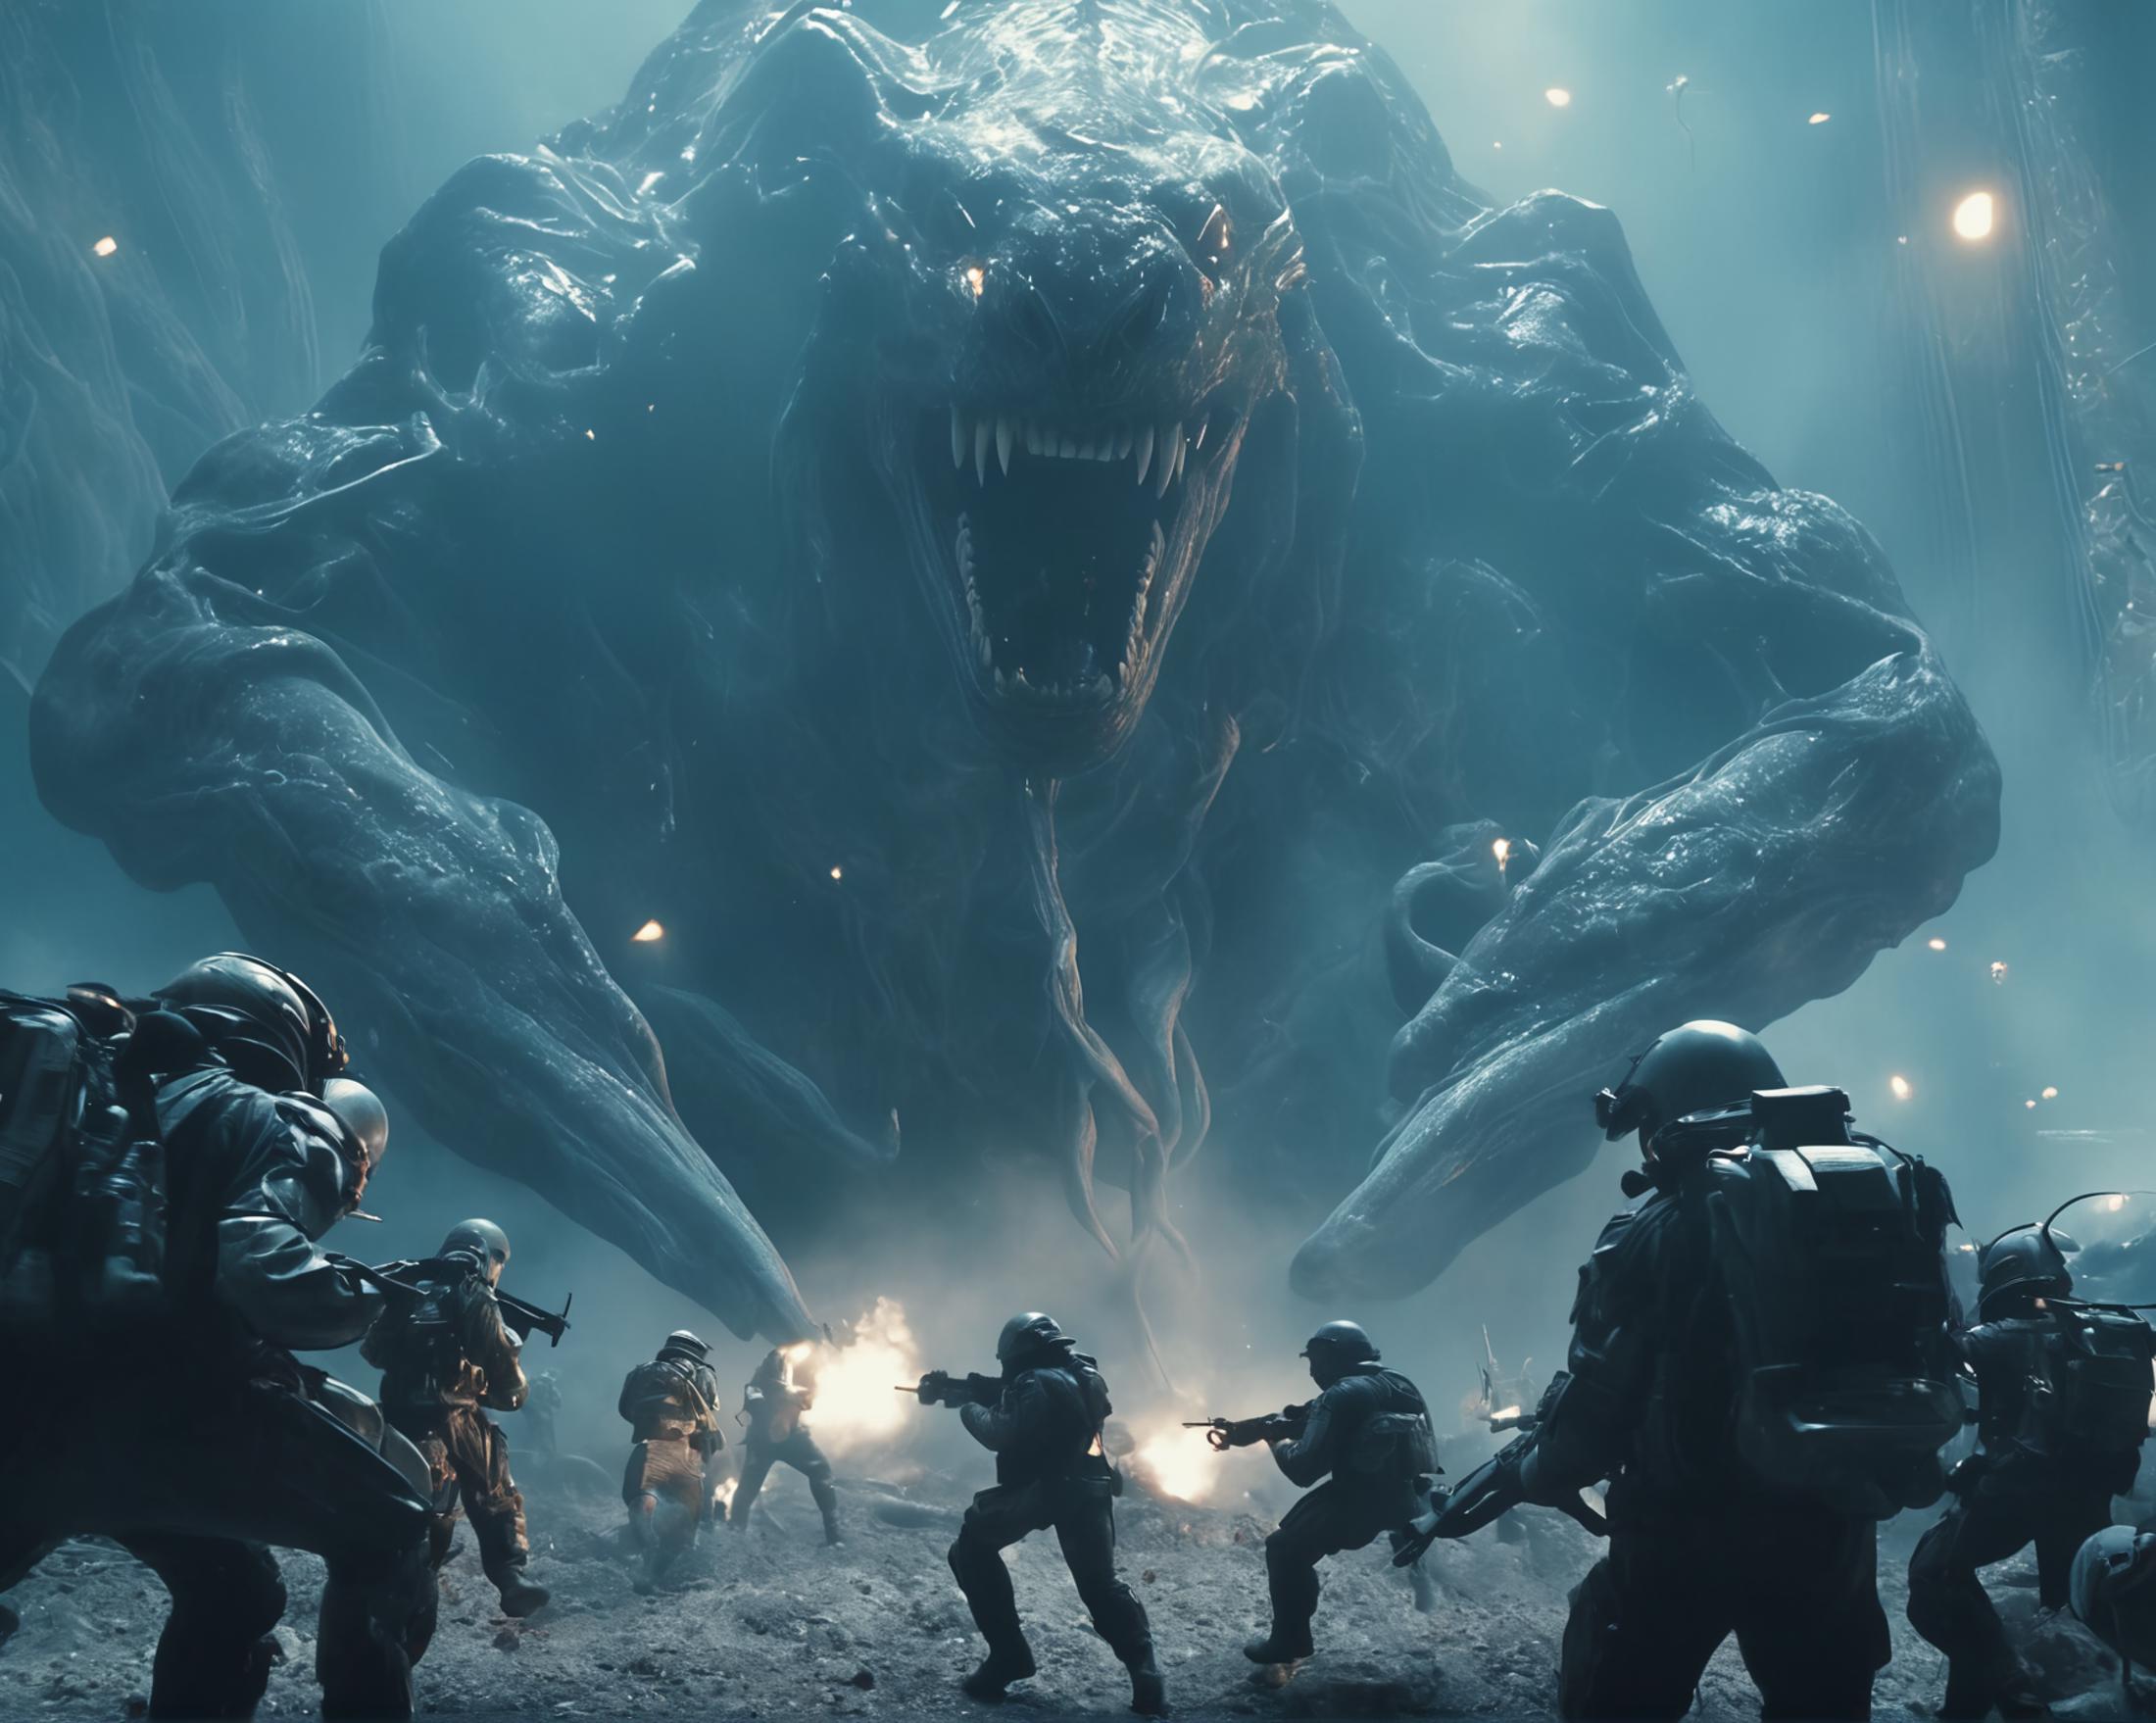 A group of soldiers fighting a giant monster with sharp teeth.